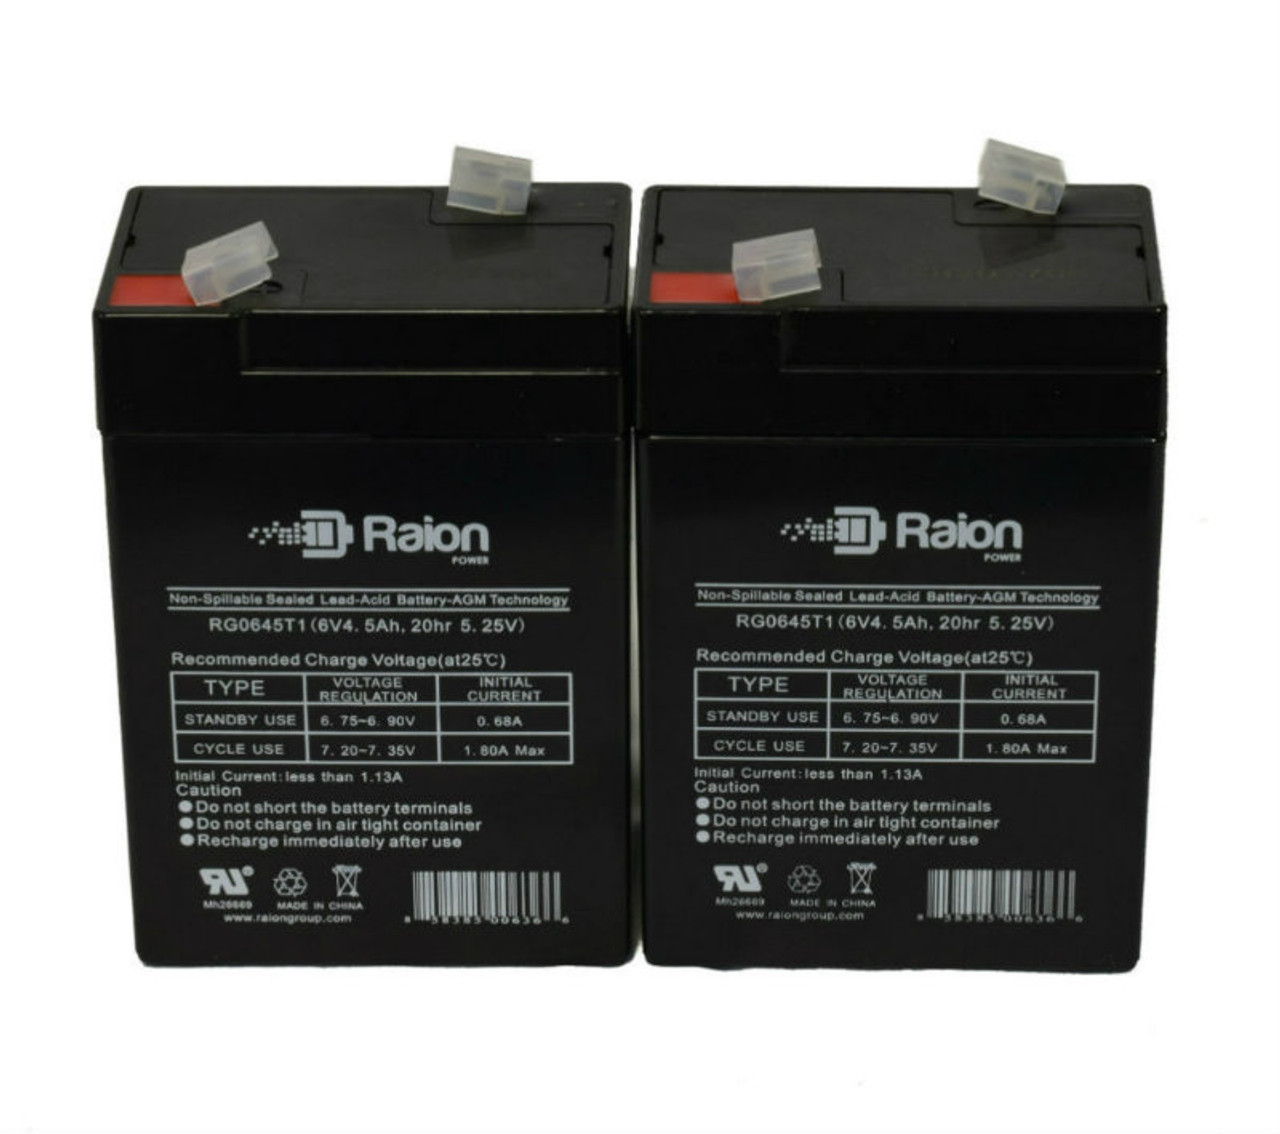 Raion Power 6V 4.5Ah Replacement Emergency Light Battery for Lithonia ELM-2513 - 2 Pack